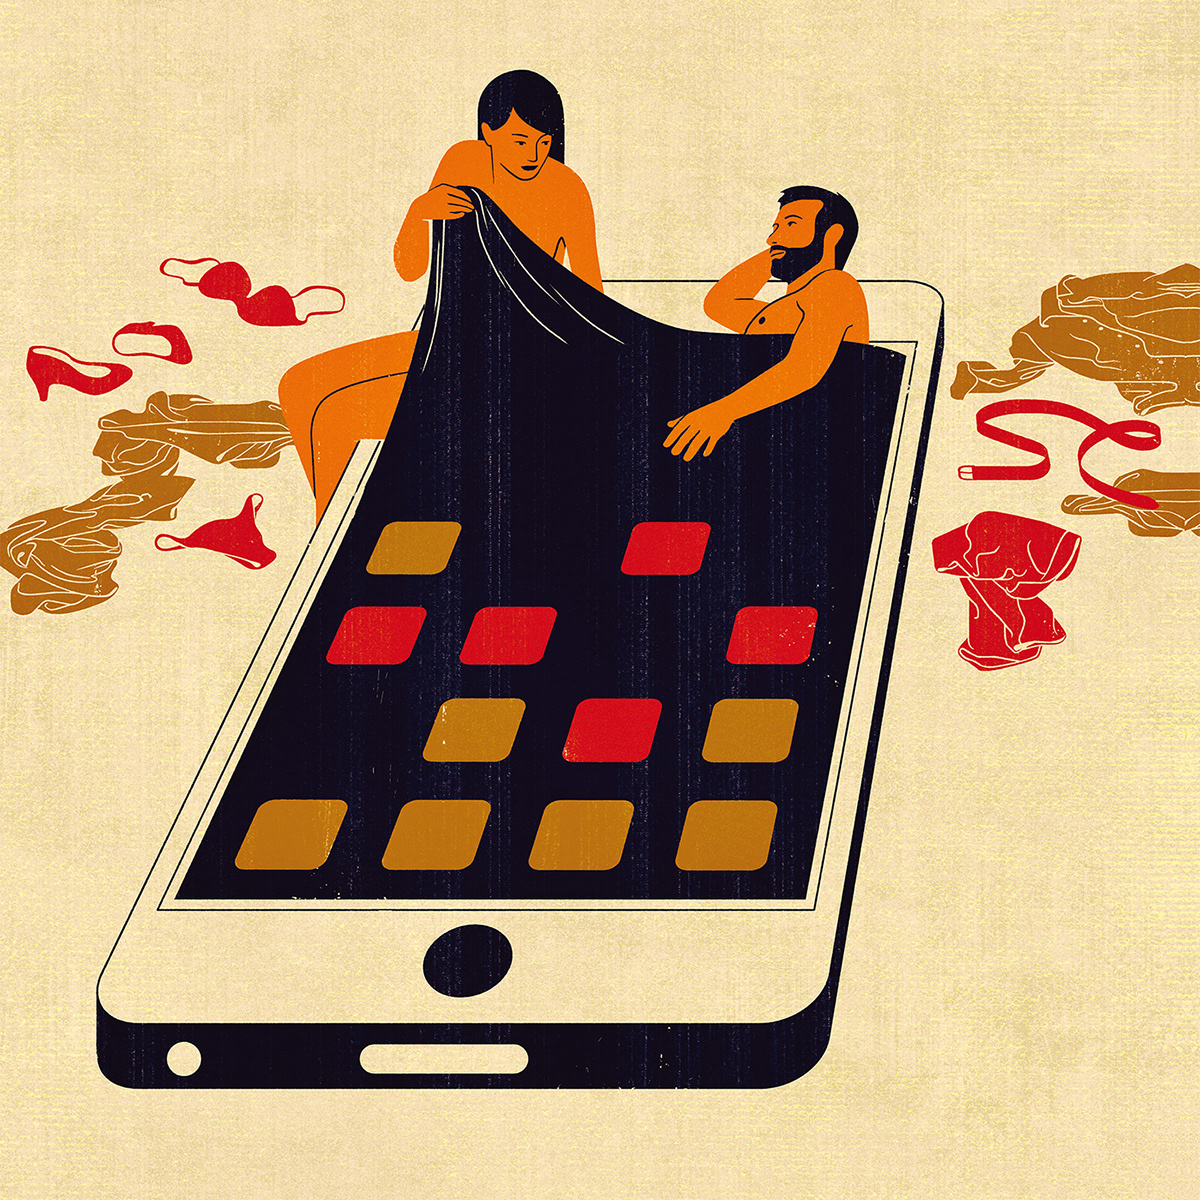 Conceptual illustration of a couple going to bed shaped like a phone